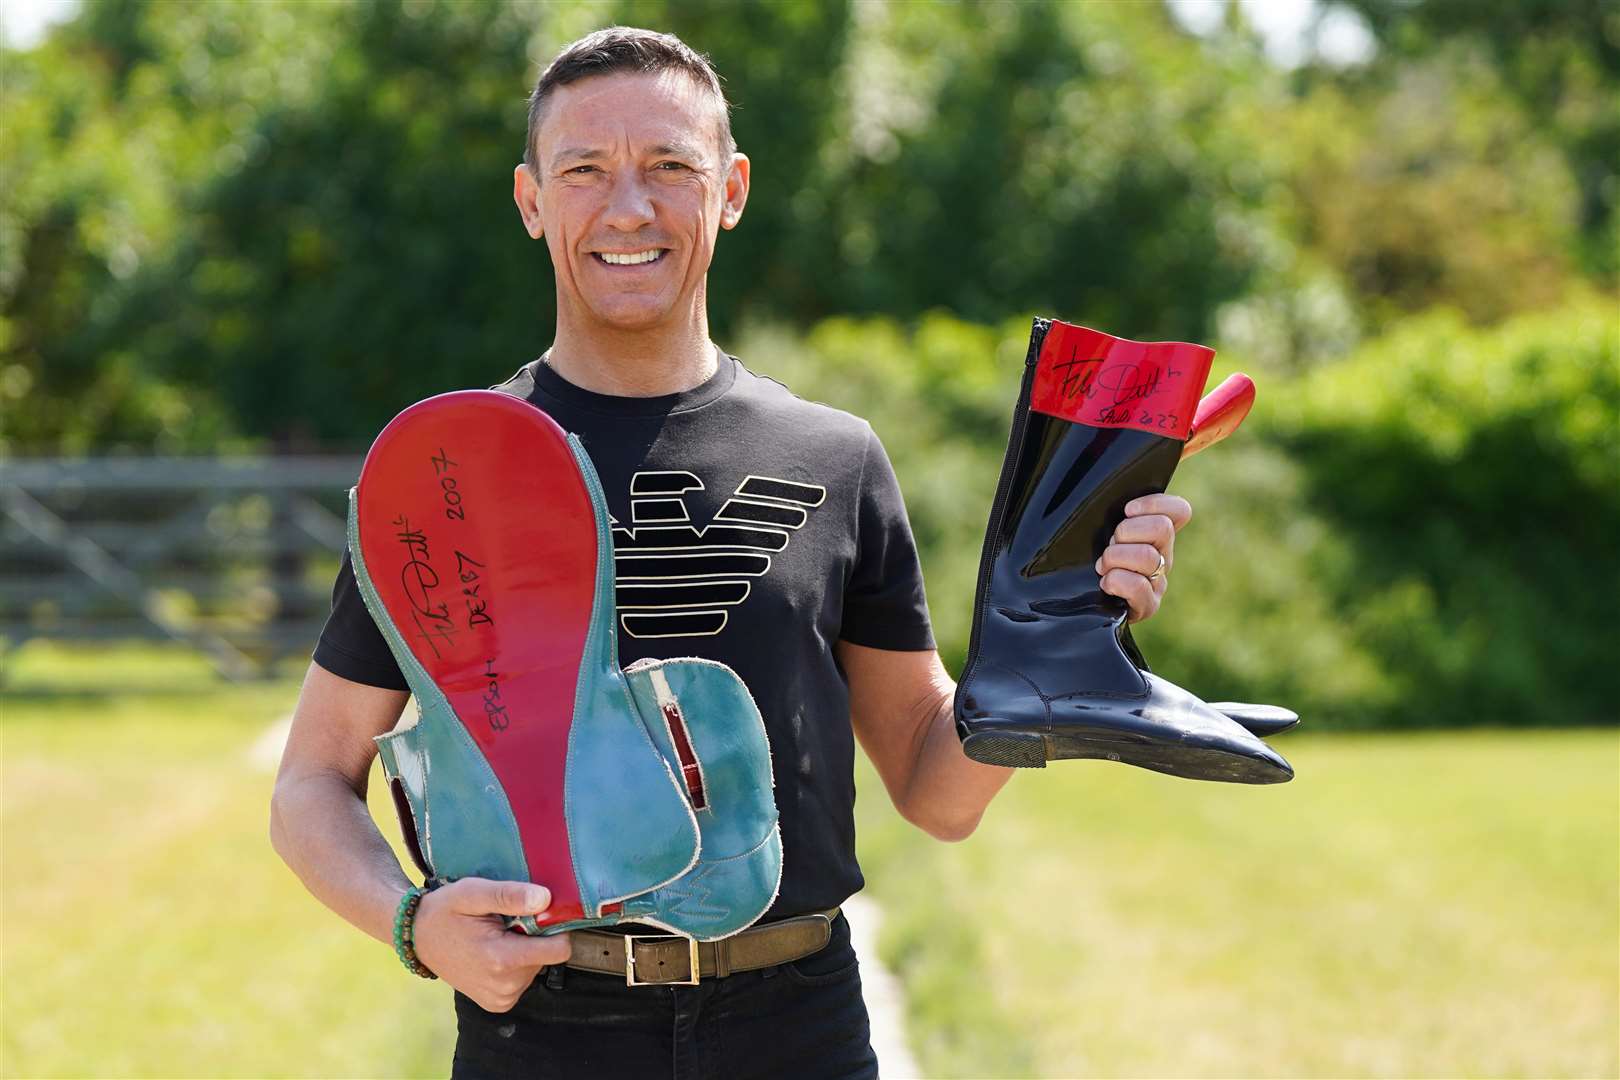 Frankie Dettori holds riding boots and equipment ahead of the auction (Jacob King/ PA)